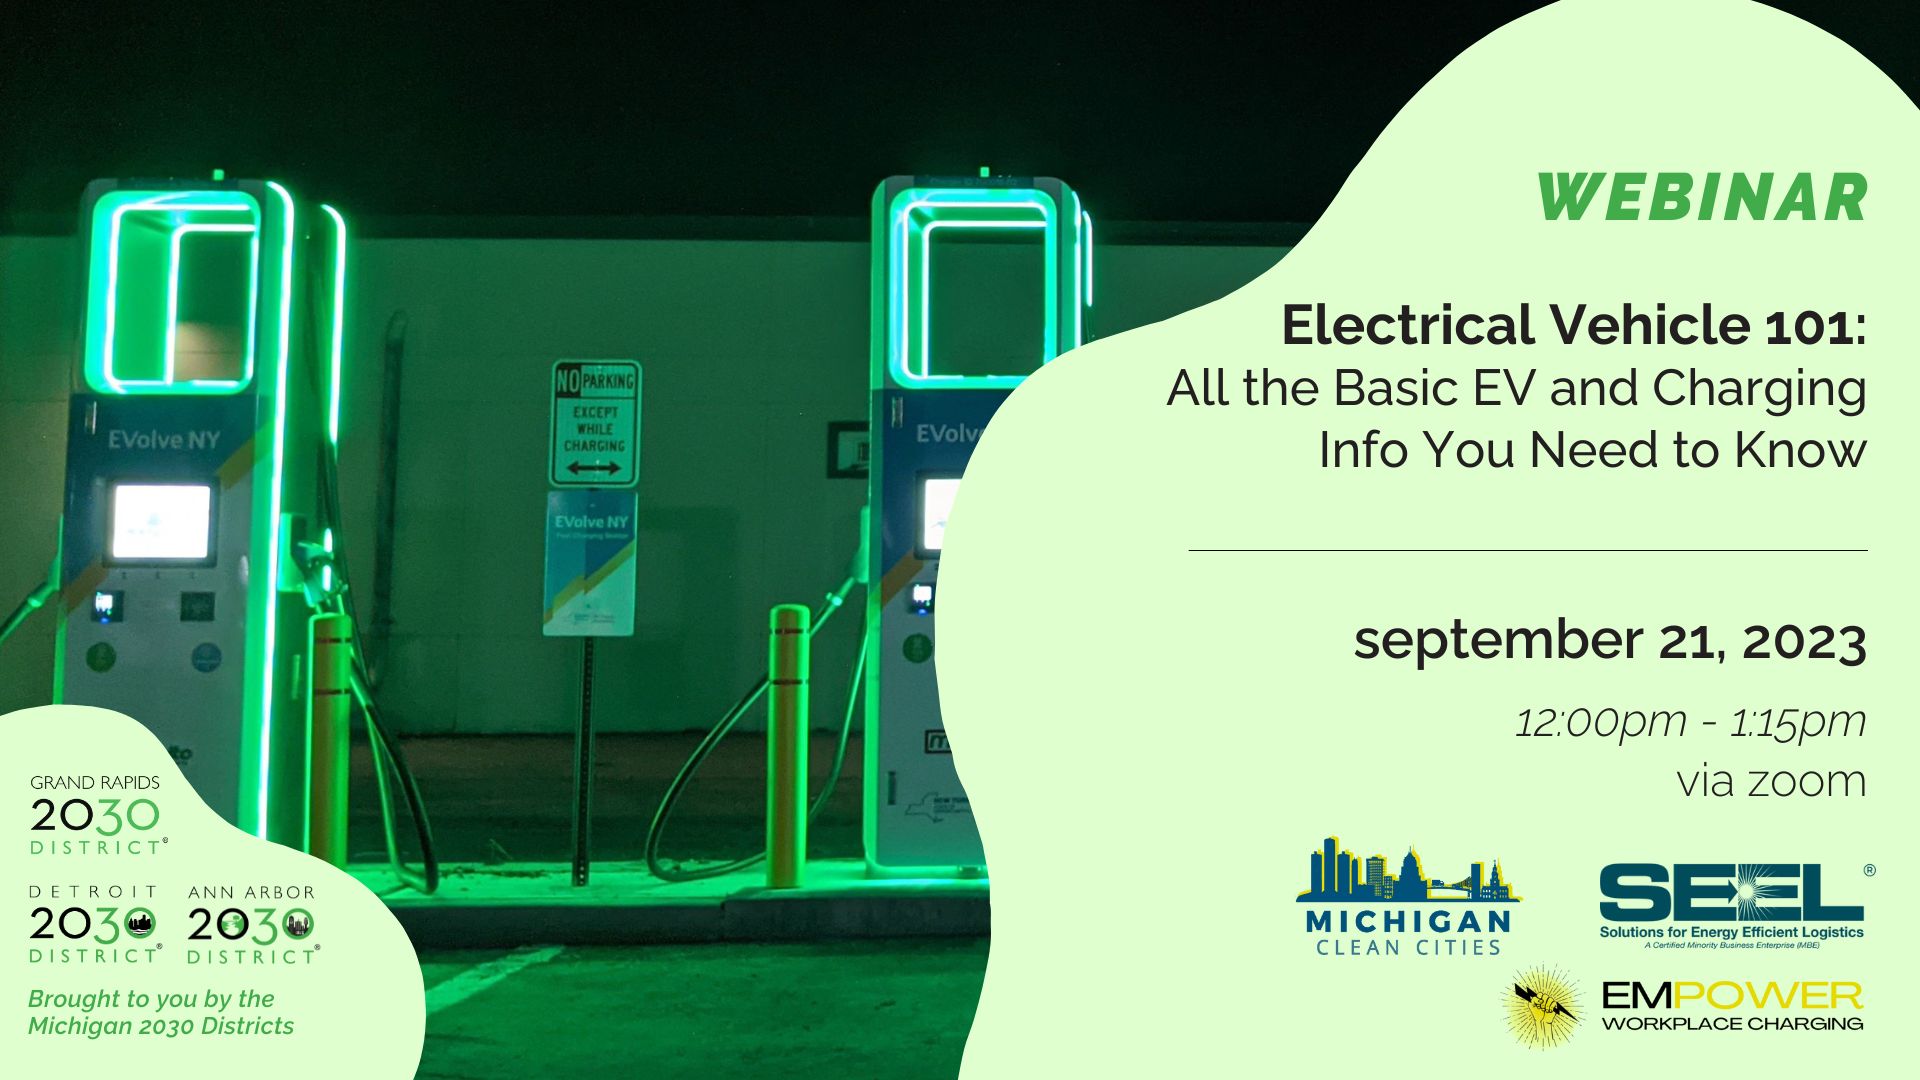 WEBINAR Electrical Vehicle 101 All the Basic EV and Charging Info